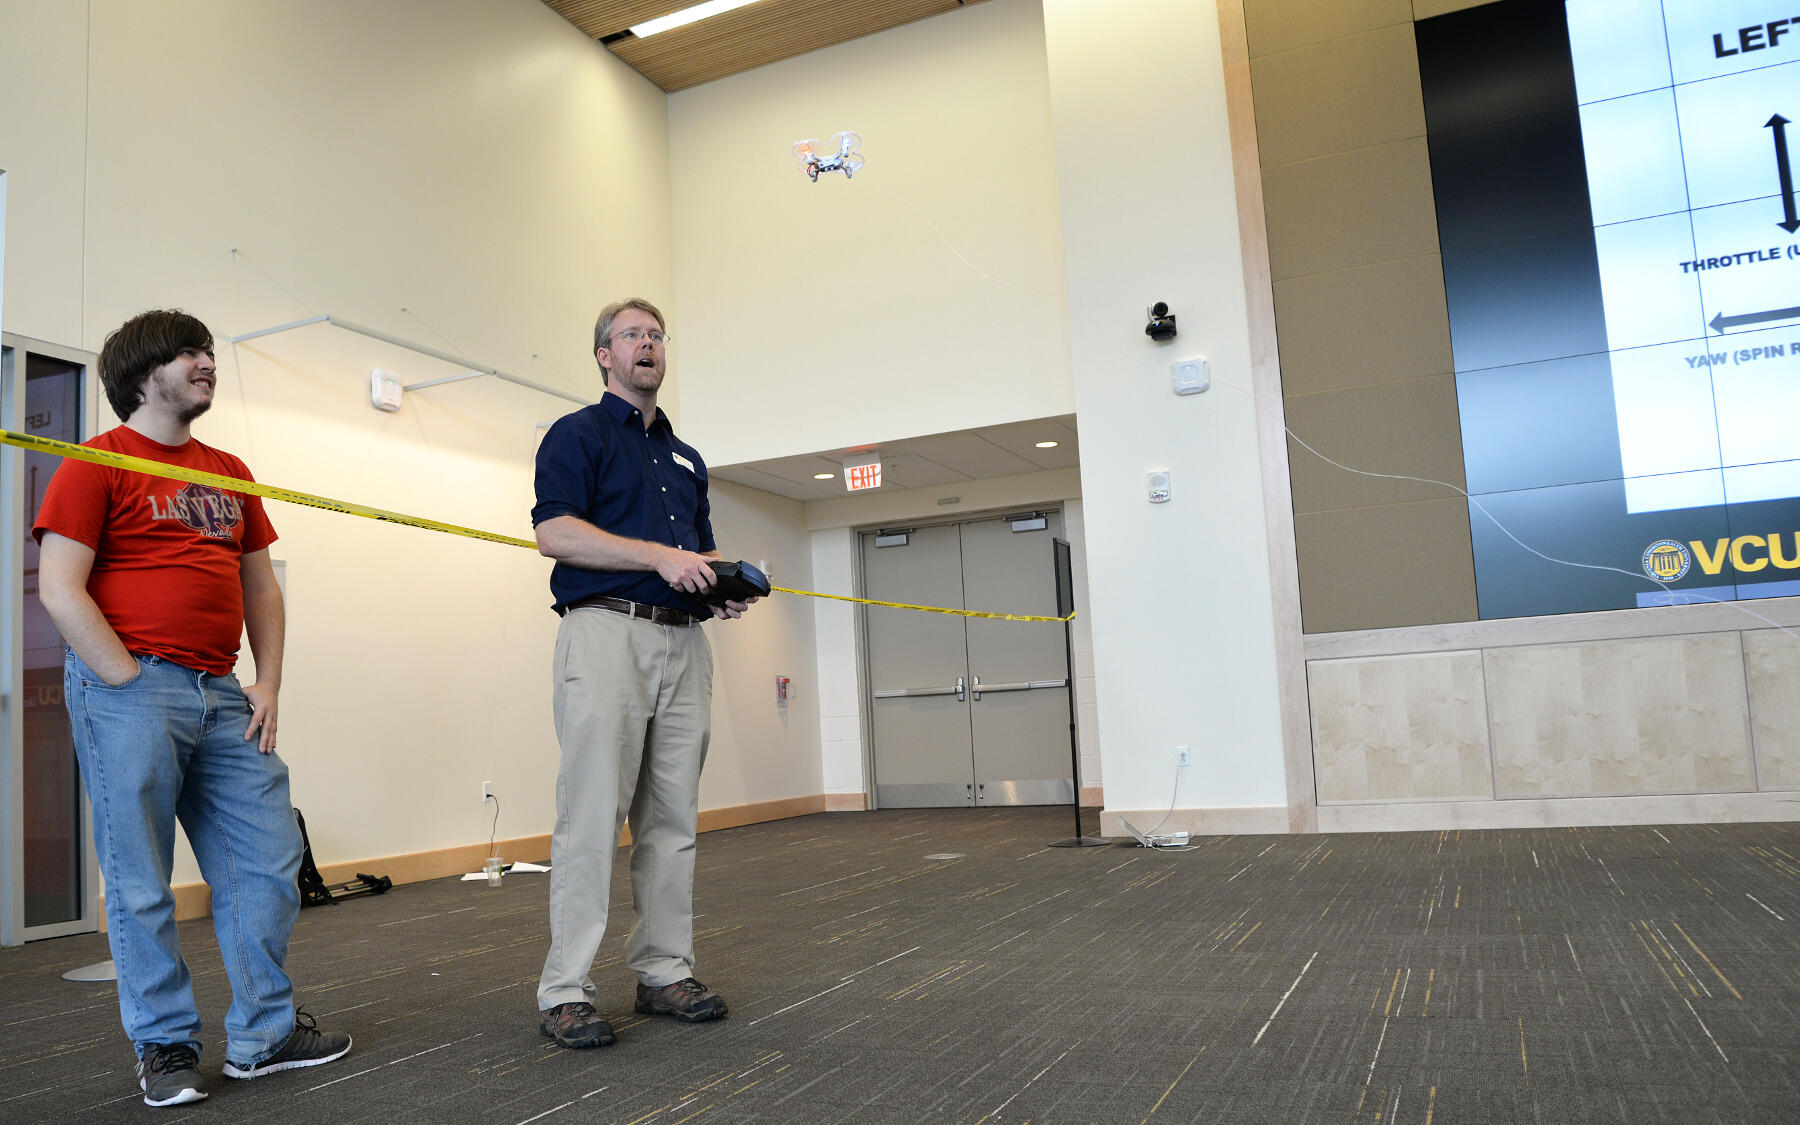 Eric Johnson, head of Innovative Media for VCU Libraries, pilots a drone while Bobby Cox, a physics major in the College of Humanities and Sciences, watches.